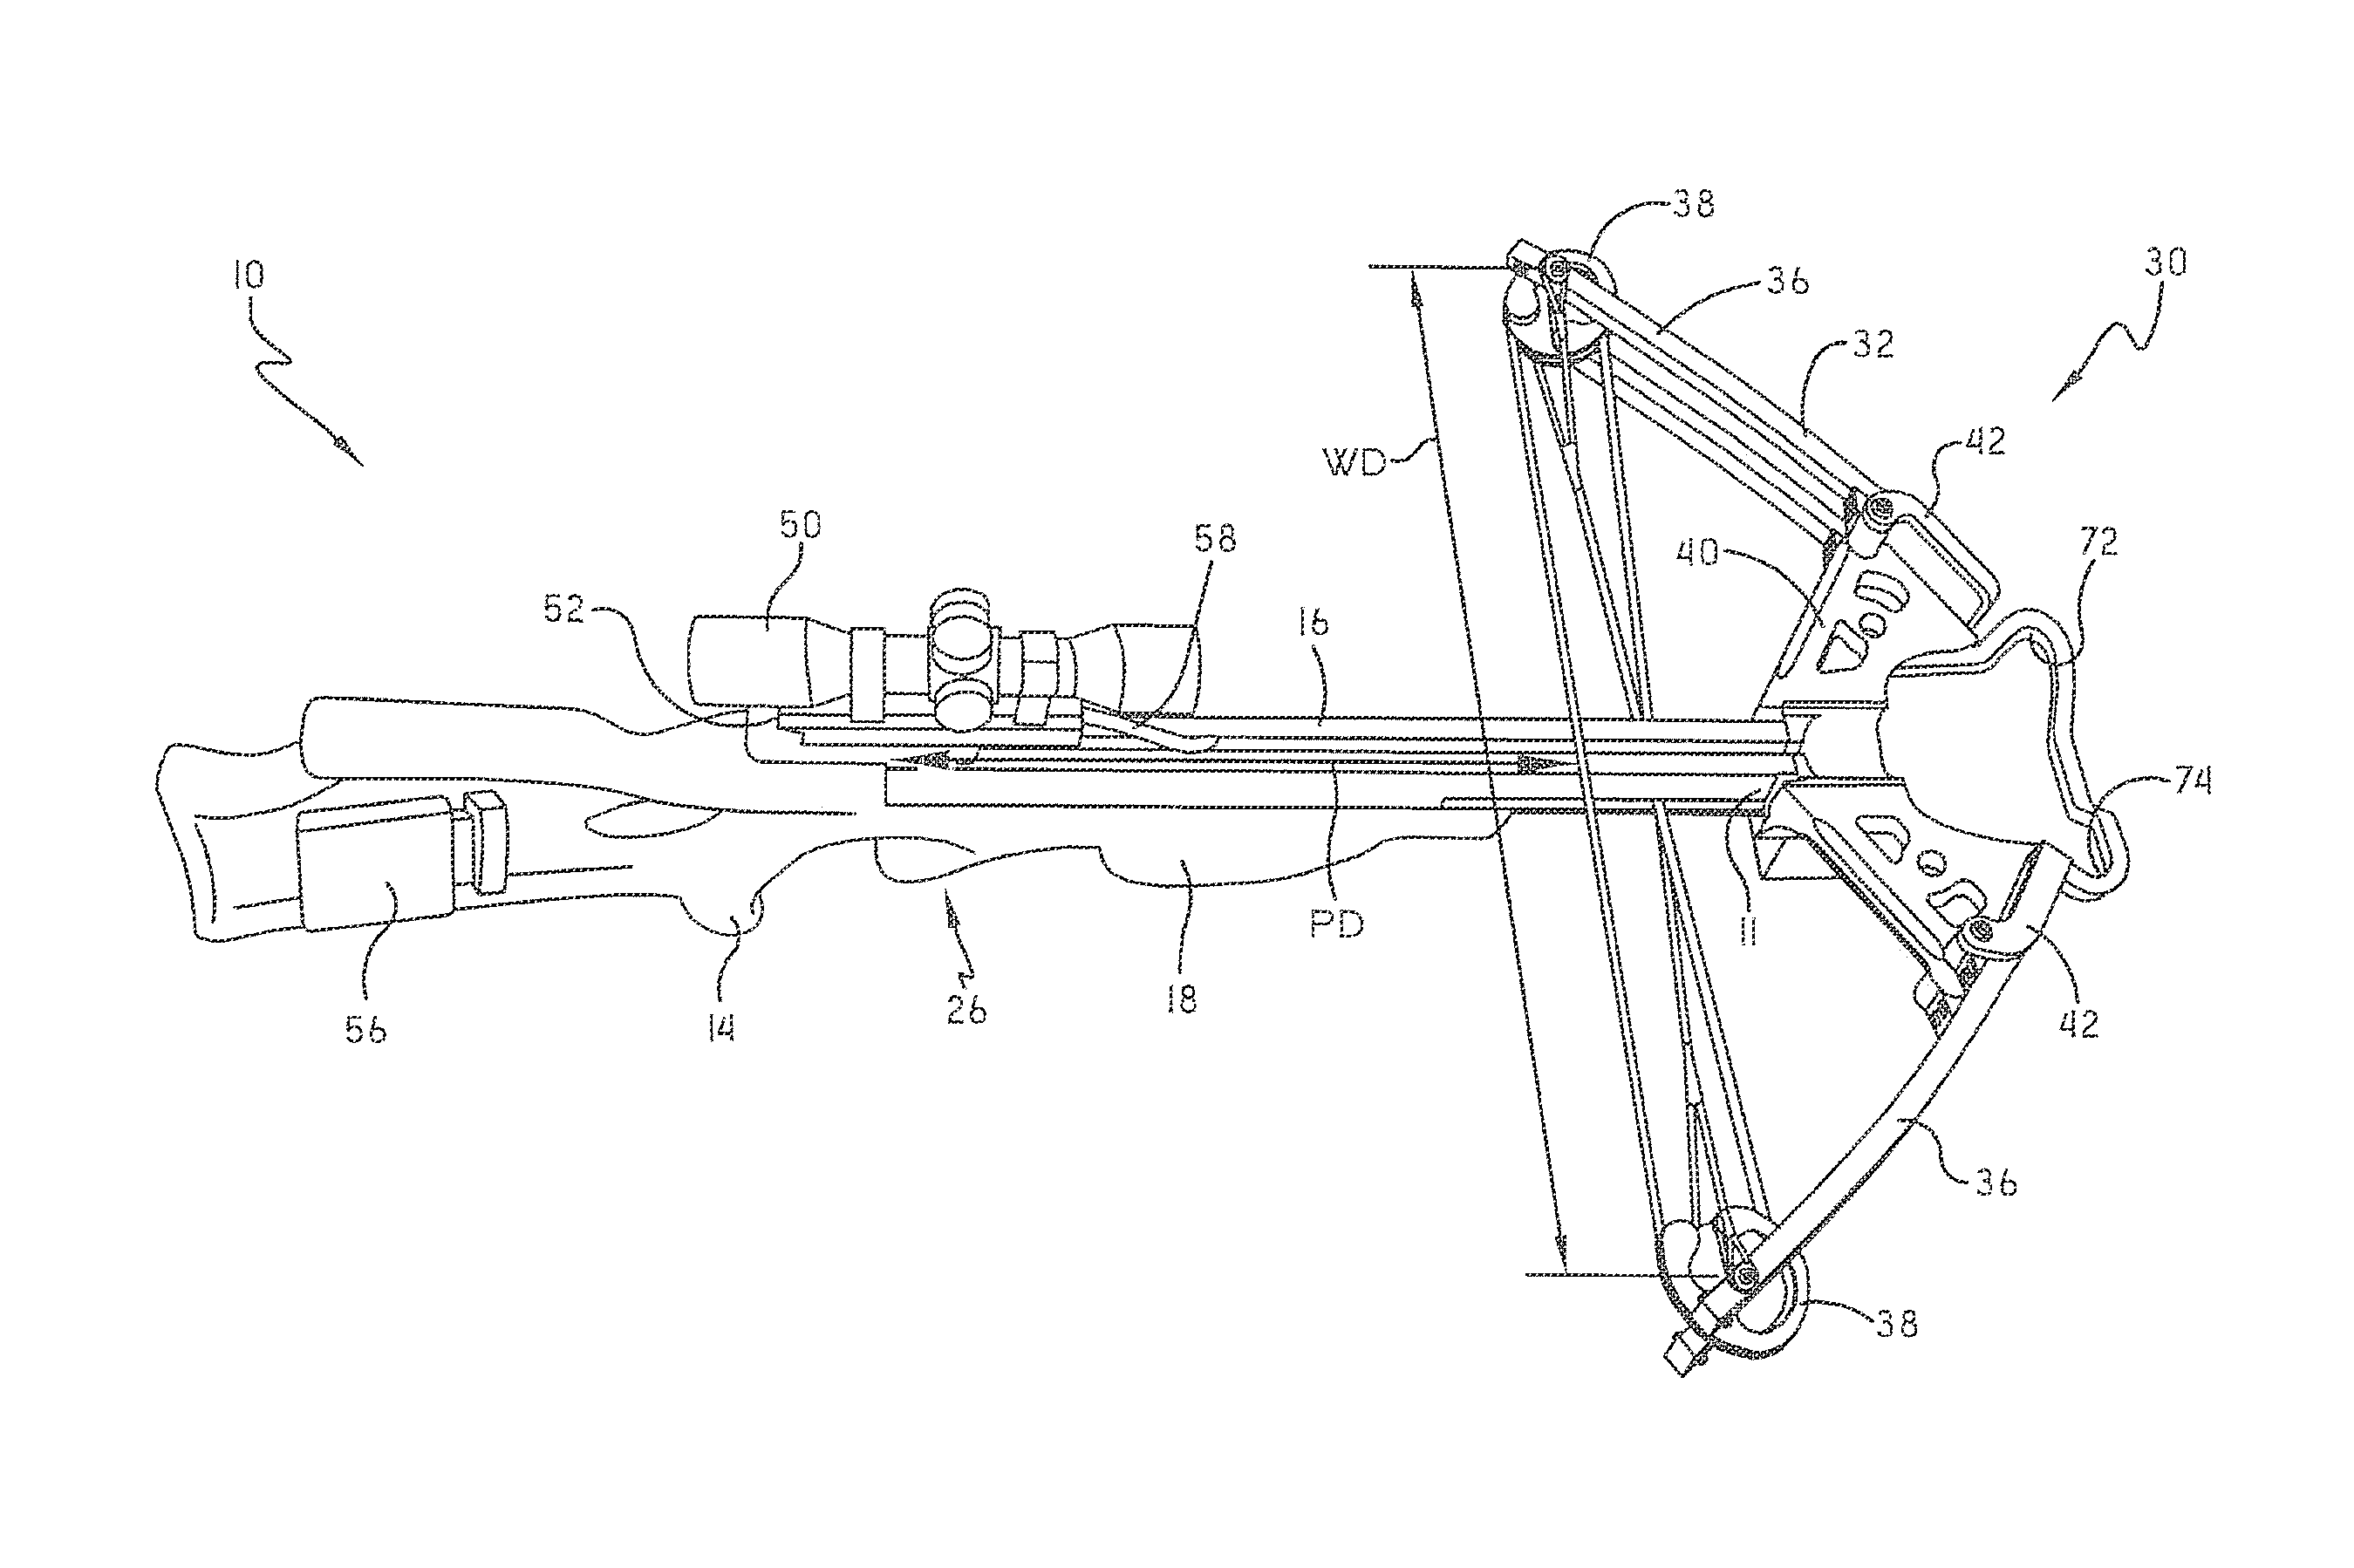 Narrow crossbow with large power stroke